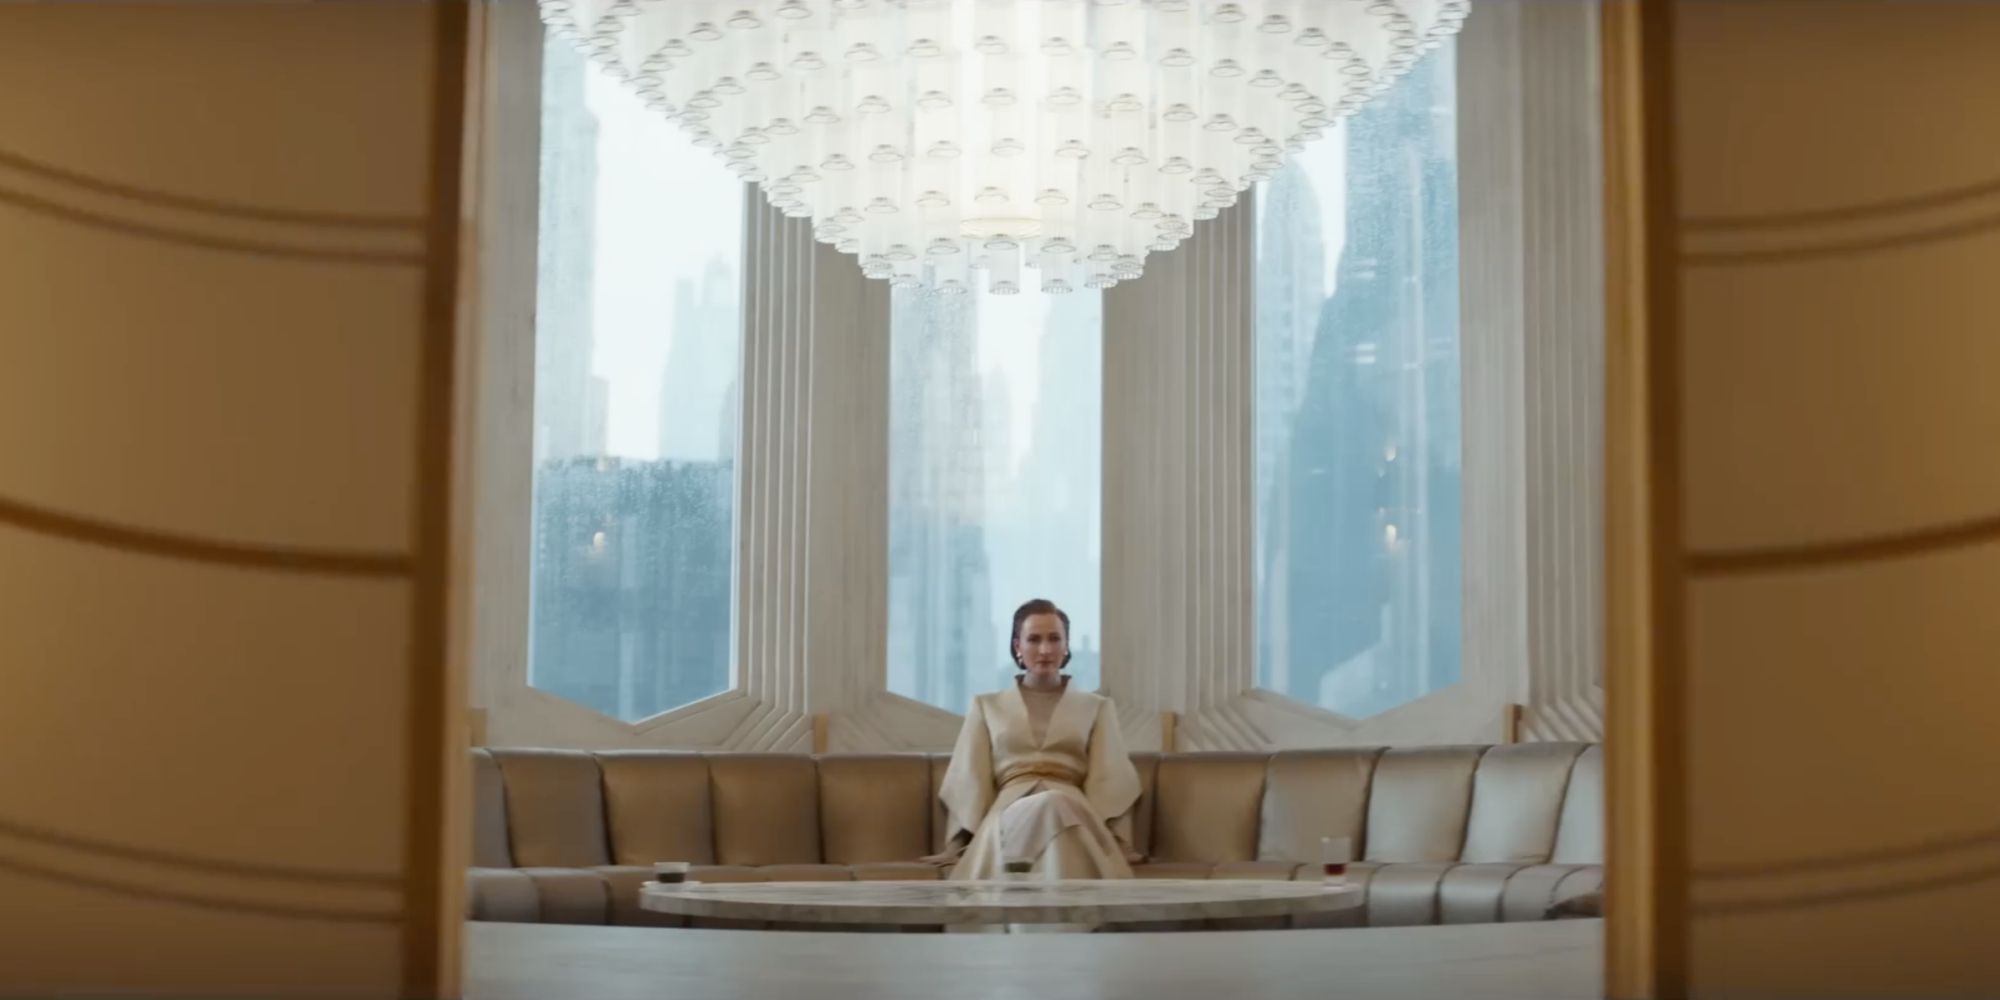 Mon Mothma sits alone beneath a chandelier as the doors close on her in Andor.